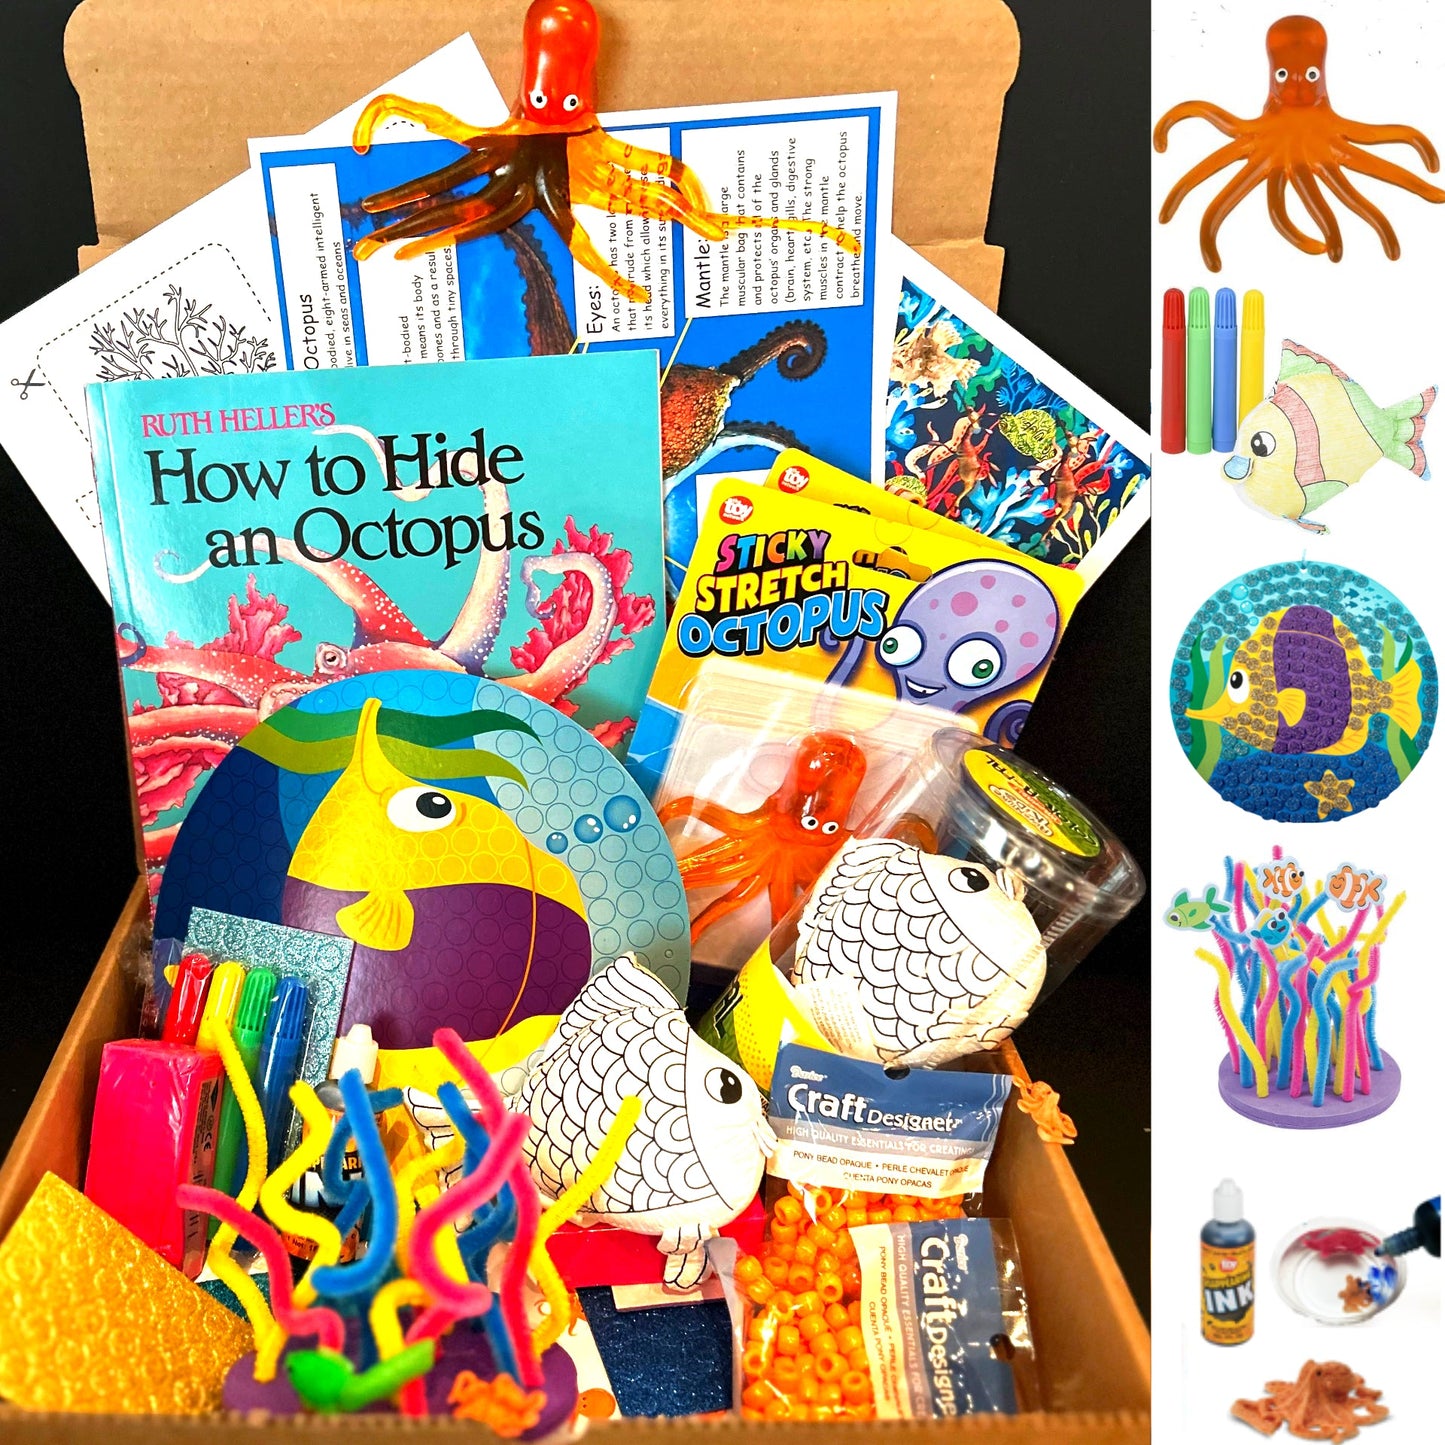 Octopus and sea creature themed activity kit